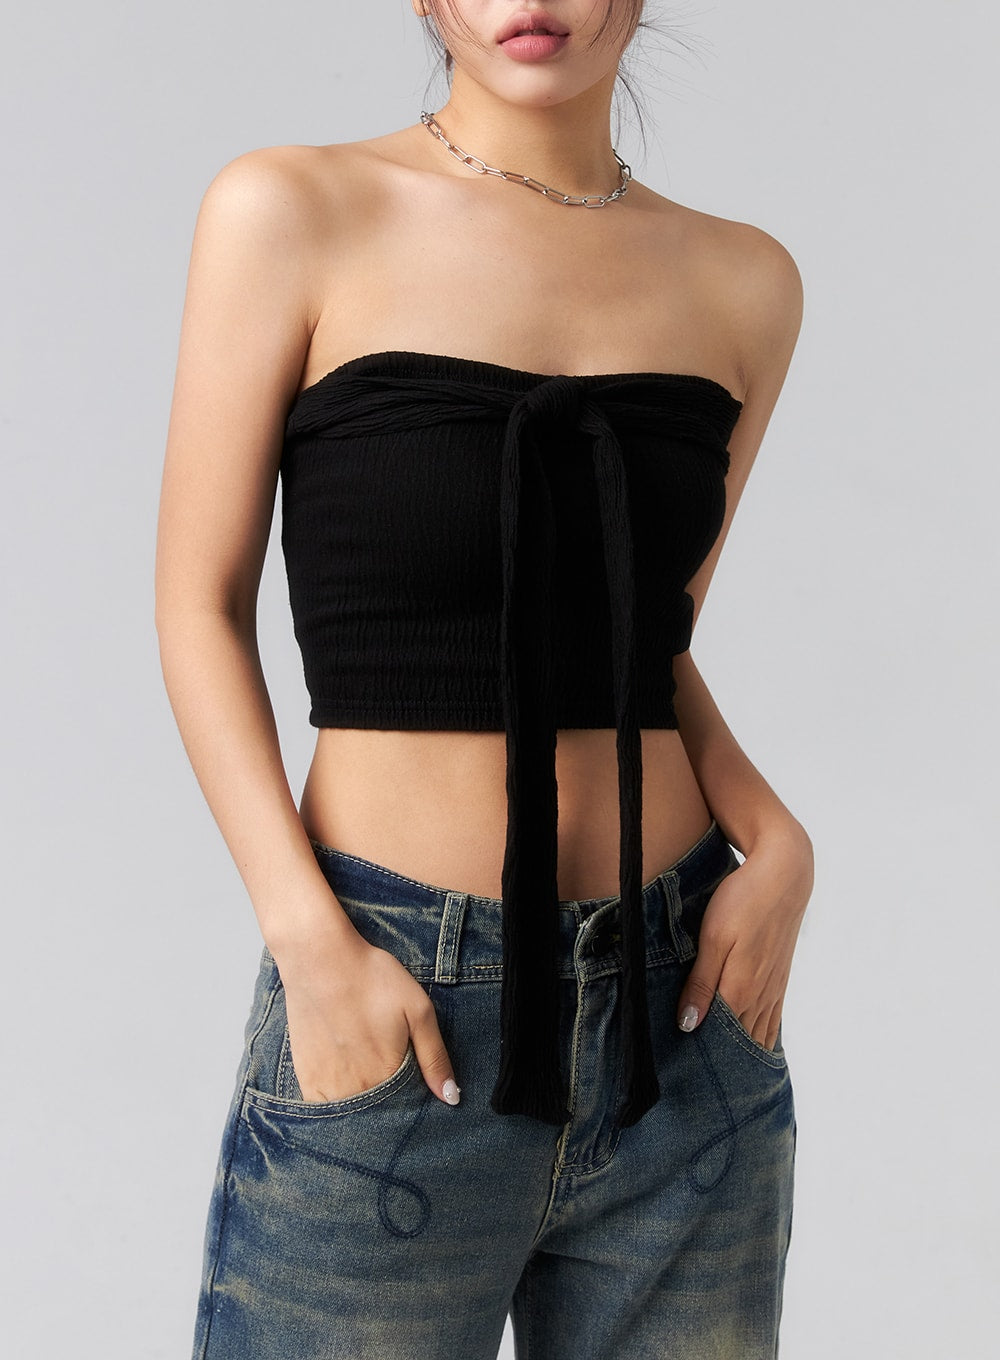 Mix and Straps Bandeau S00 - Women - Accessories